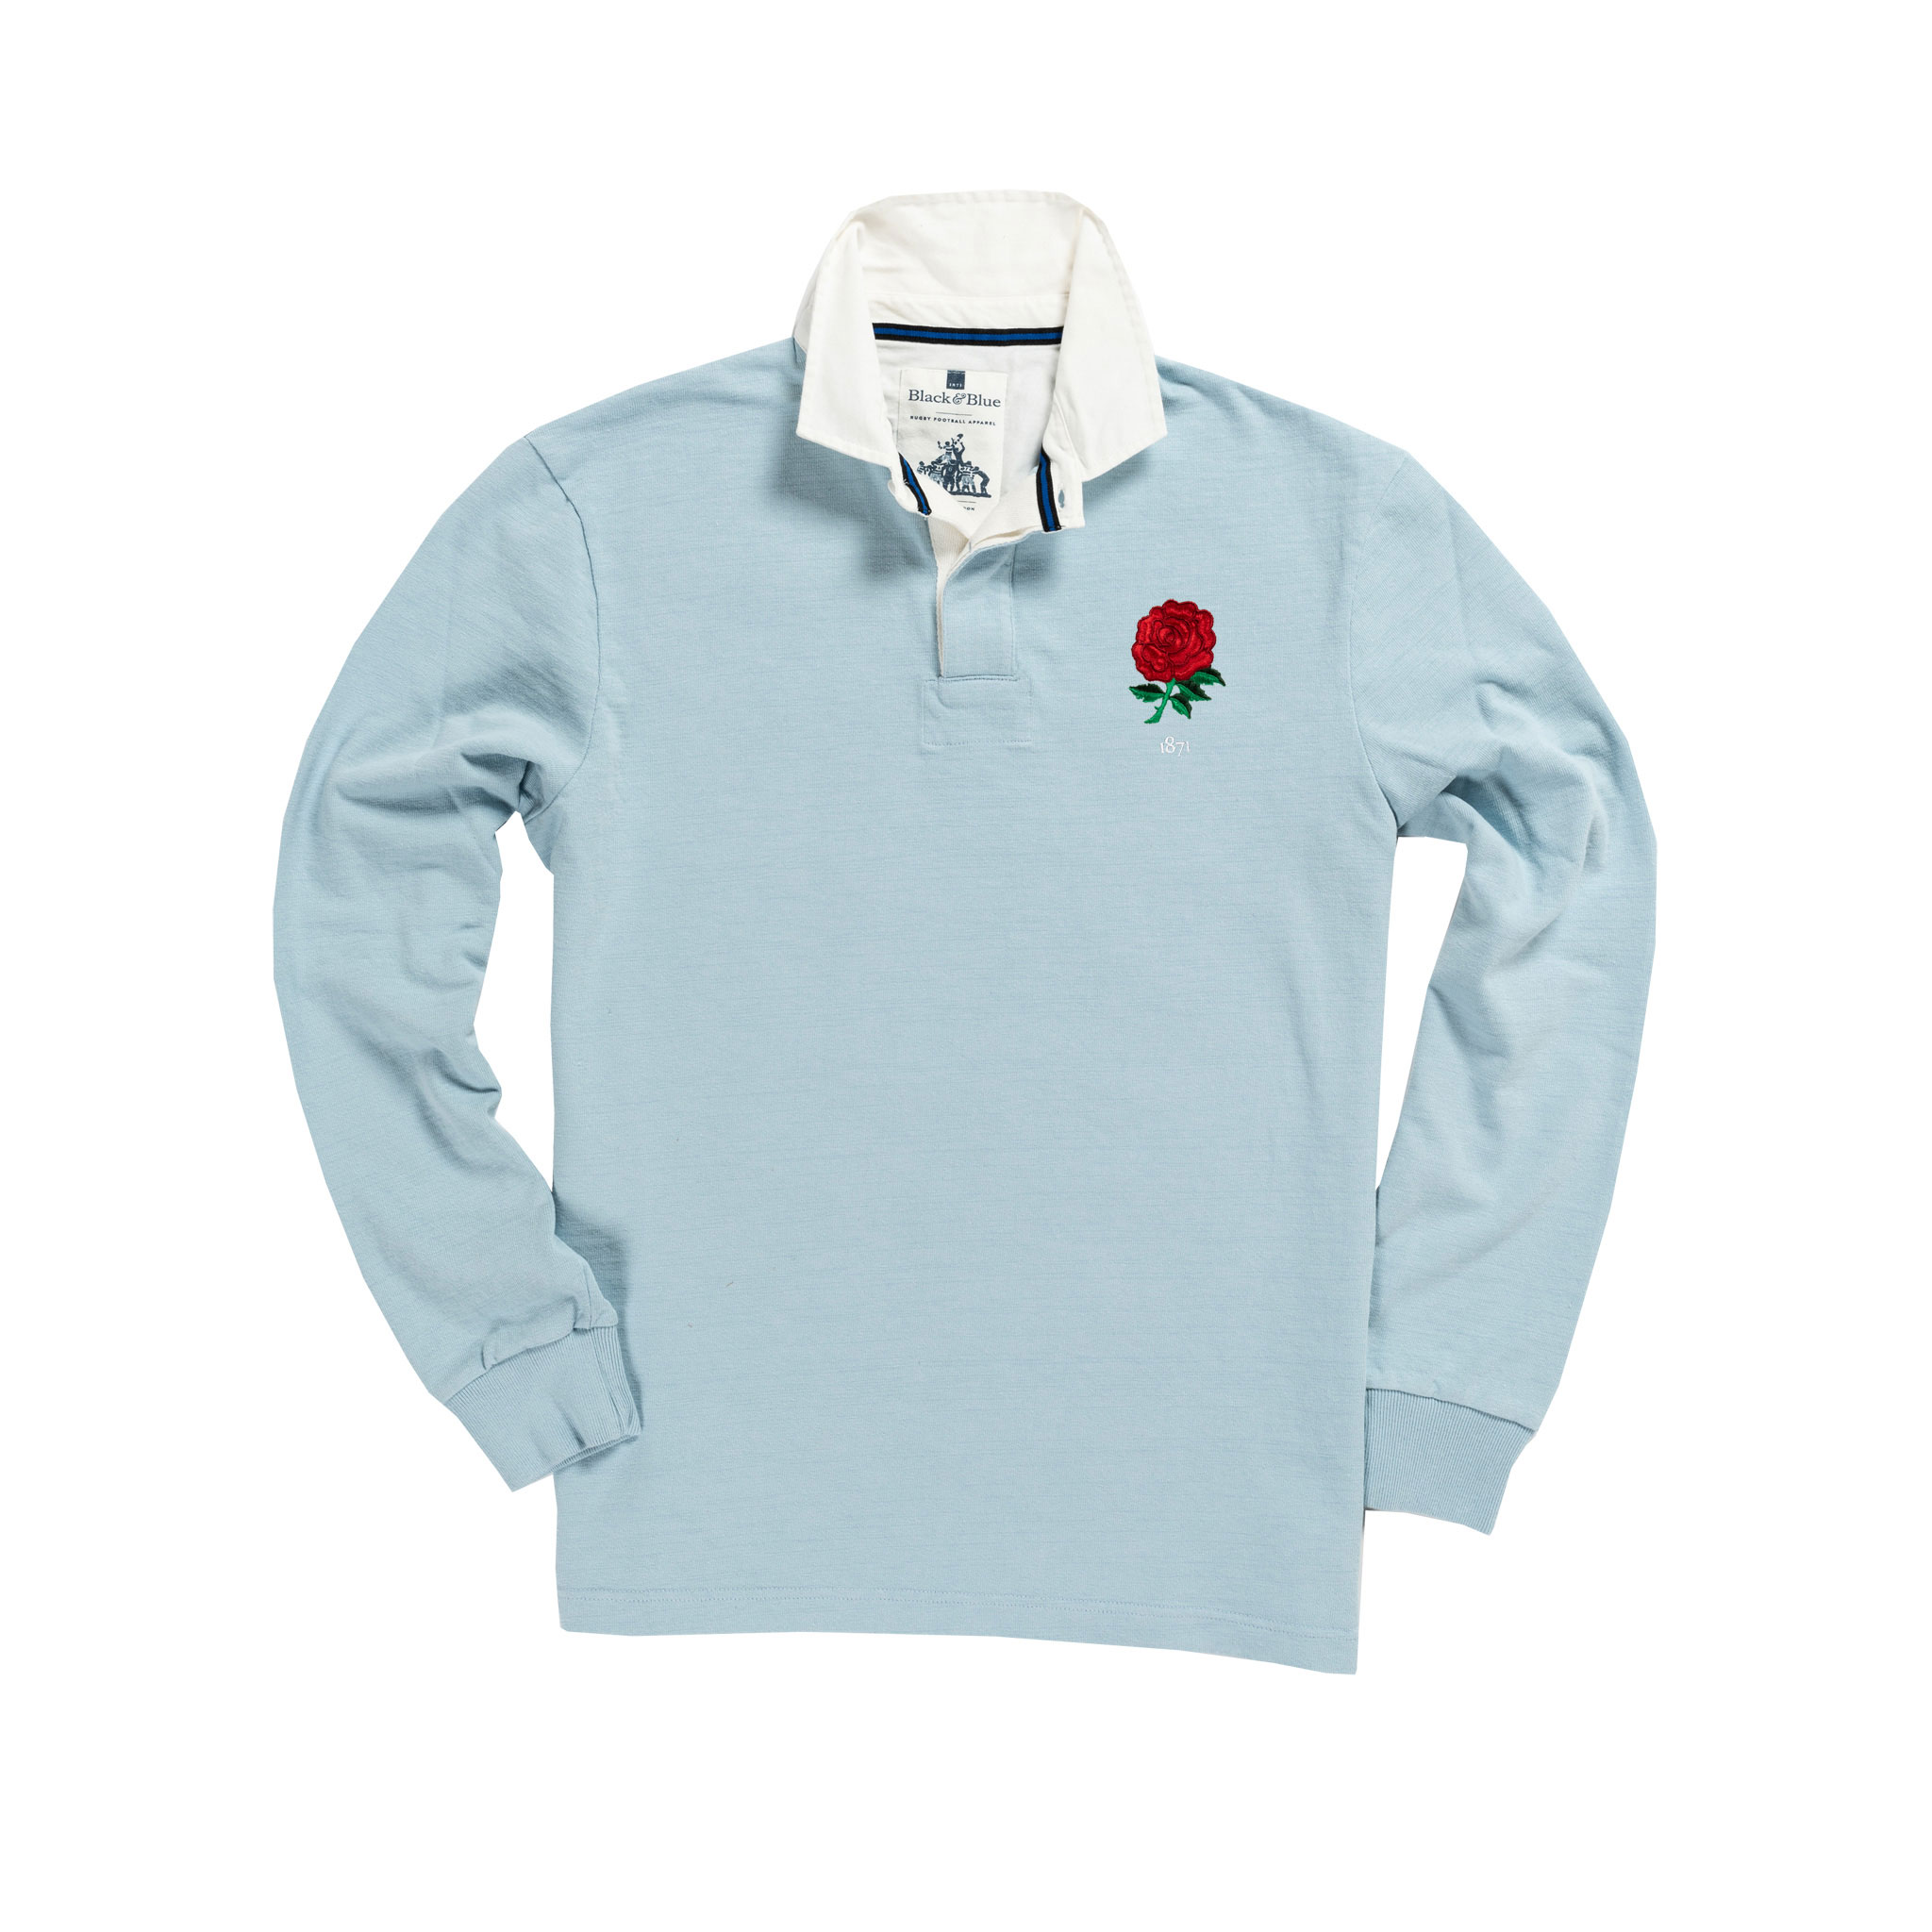 england rugby jersey womens